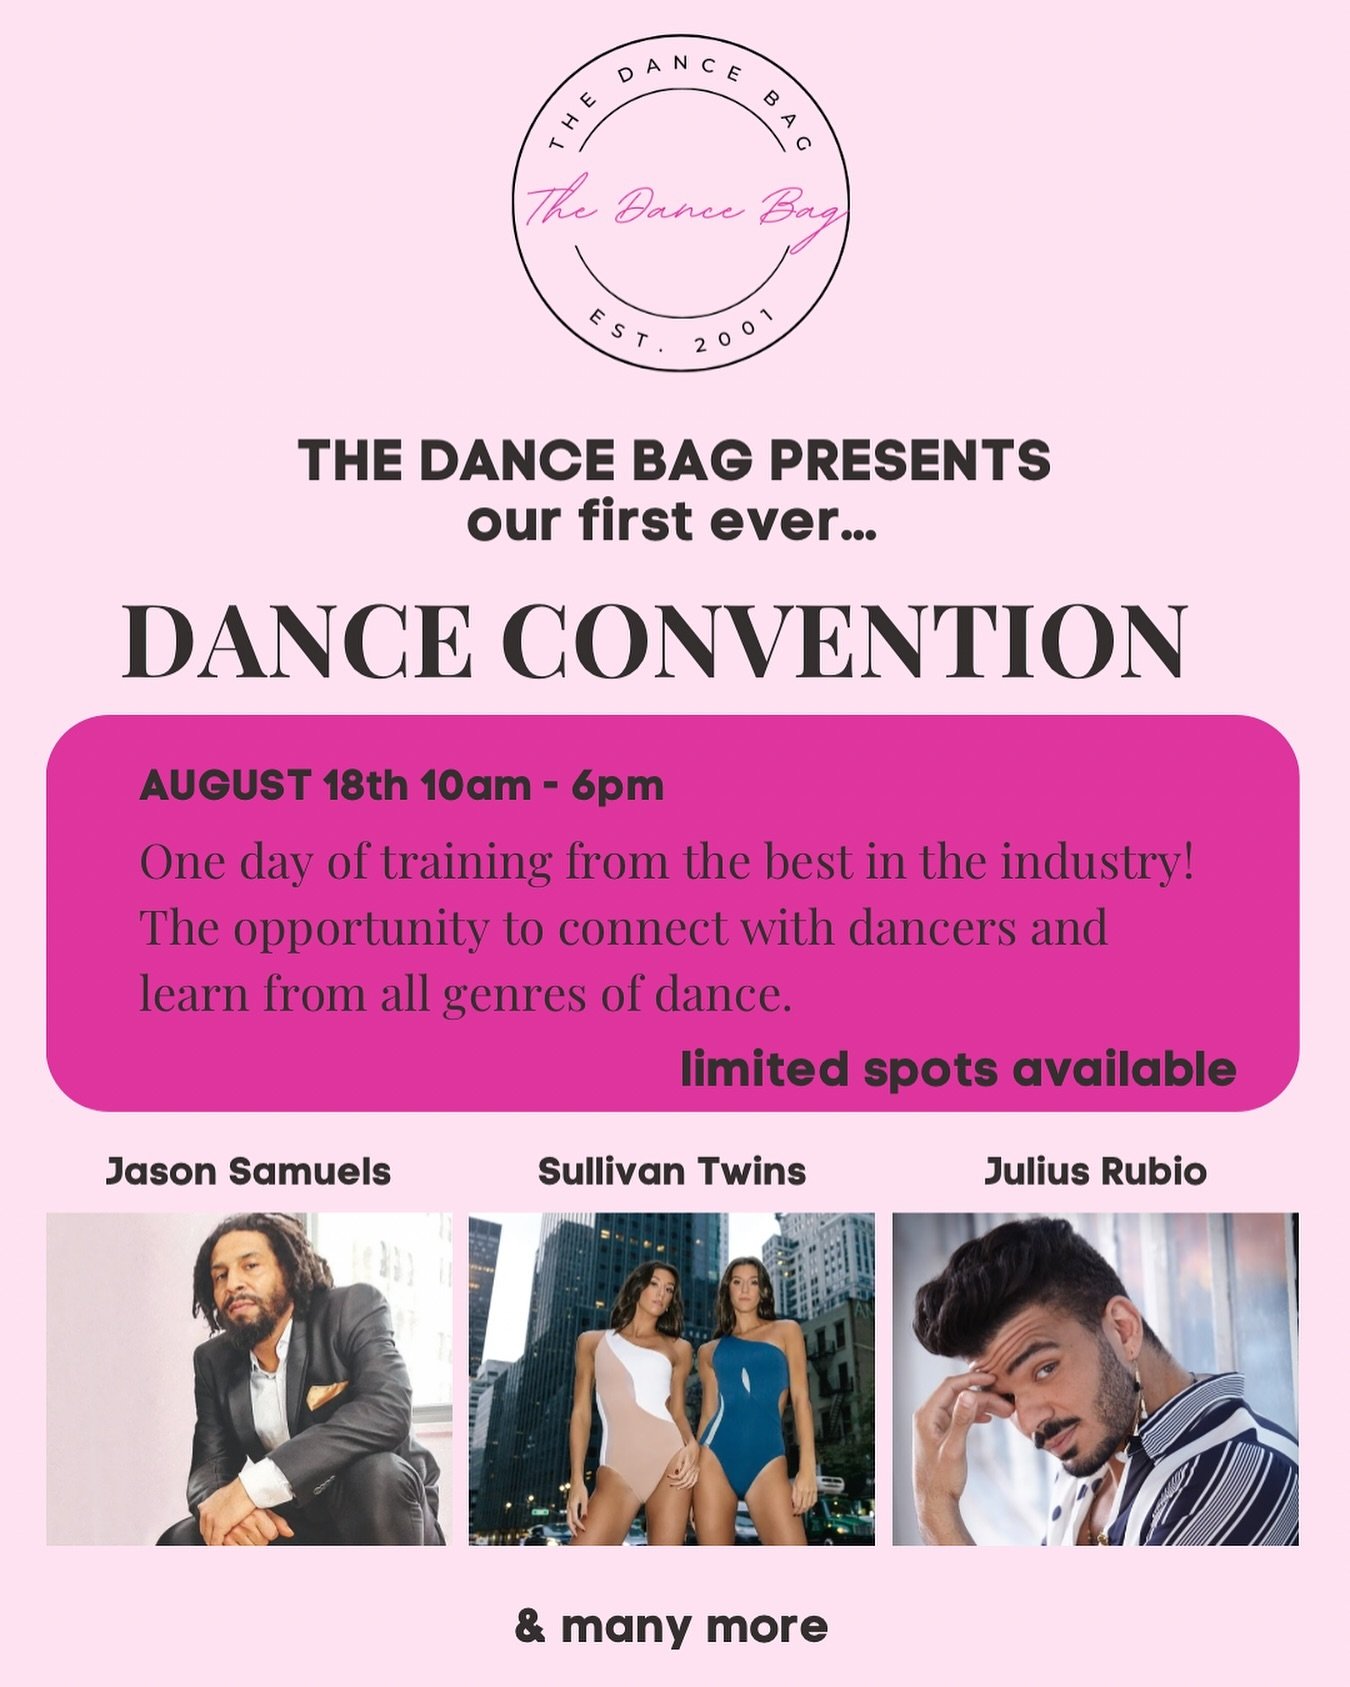 presenting The Dance Bag&rsquo;s first ever&hellip;. DANCE CONVENTION

&ldquo;Just Keeping You on Your Toes&rdquo; is a one-day dance convention hosted by The Dance Bag at The Park Ridge Marriott from 10am to 6pm.

Come learn from the industry&rsquo;